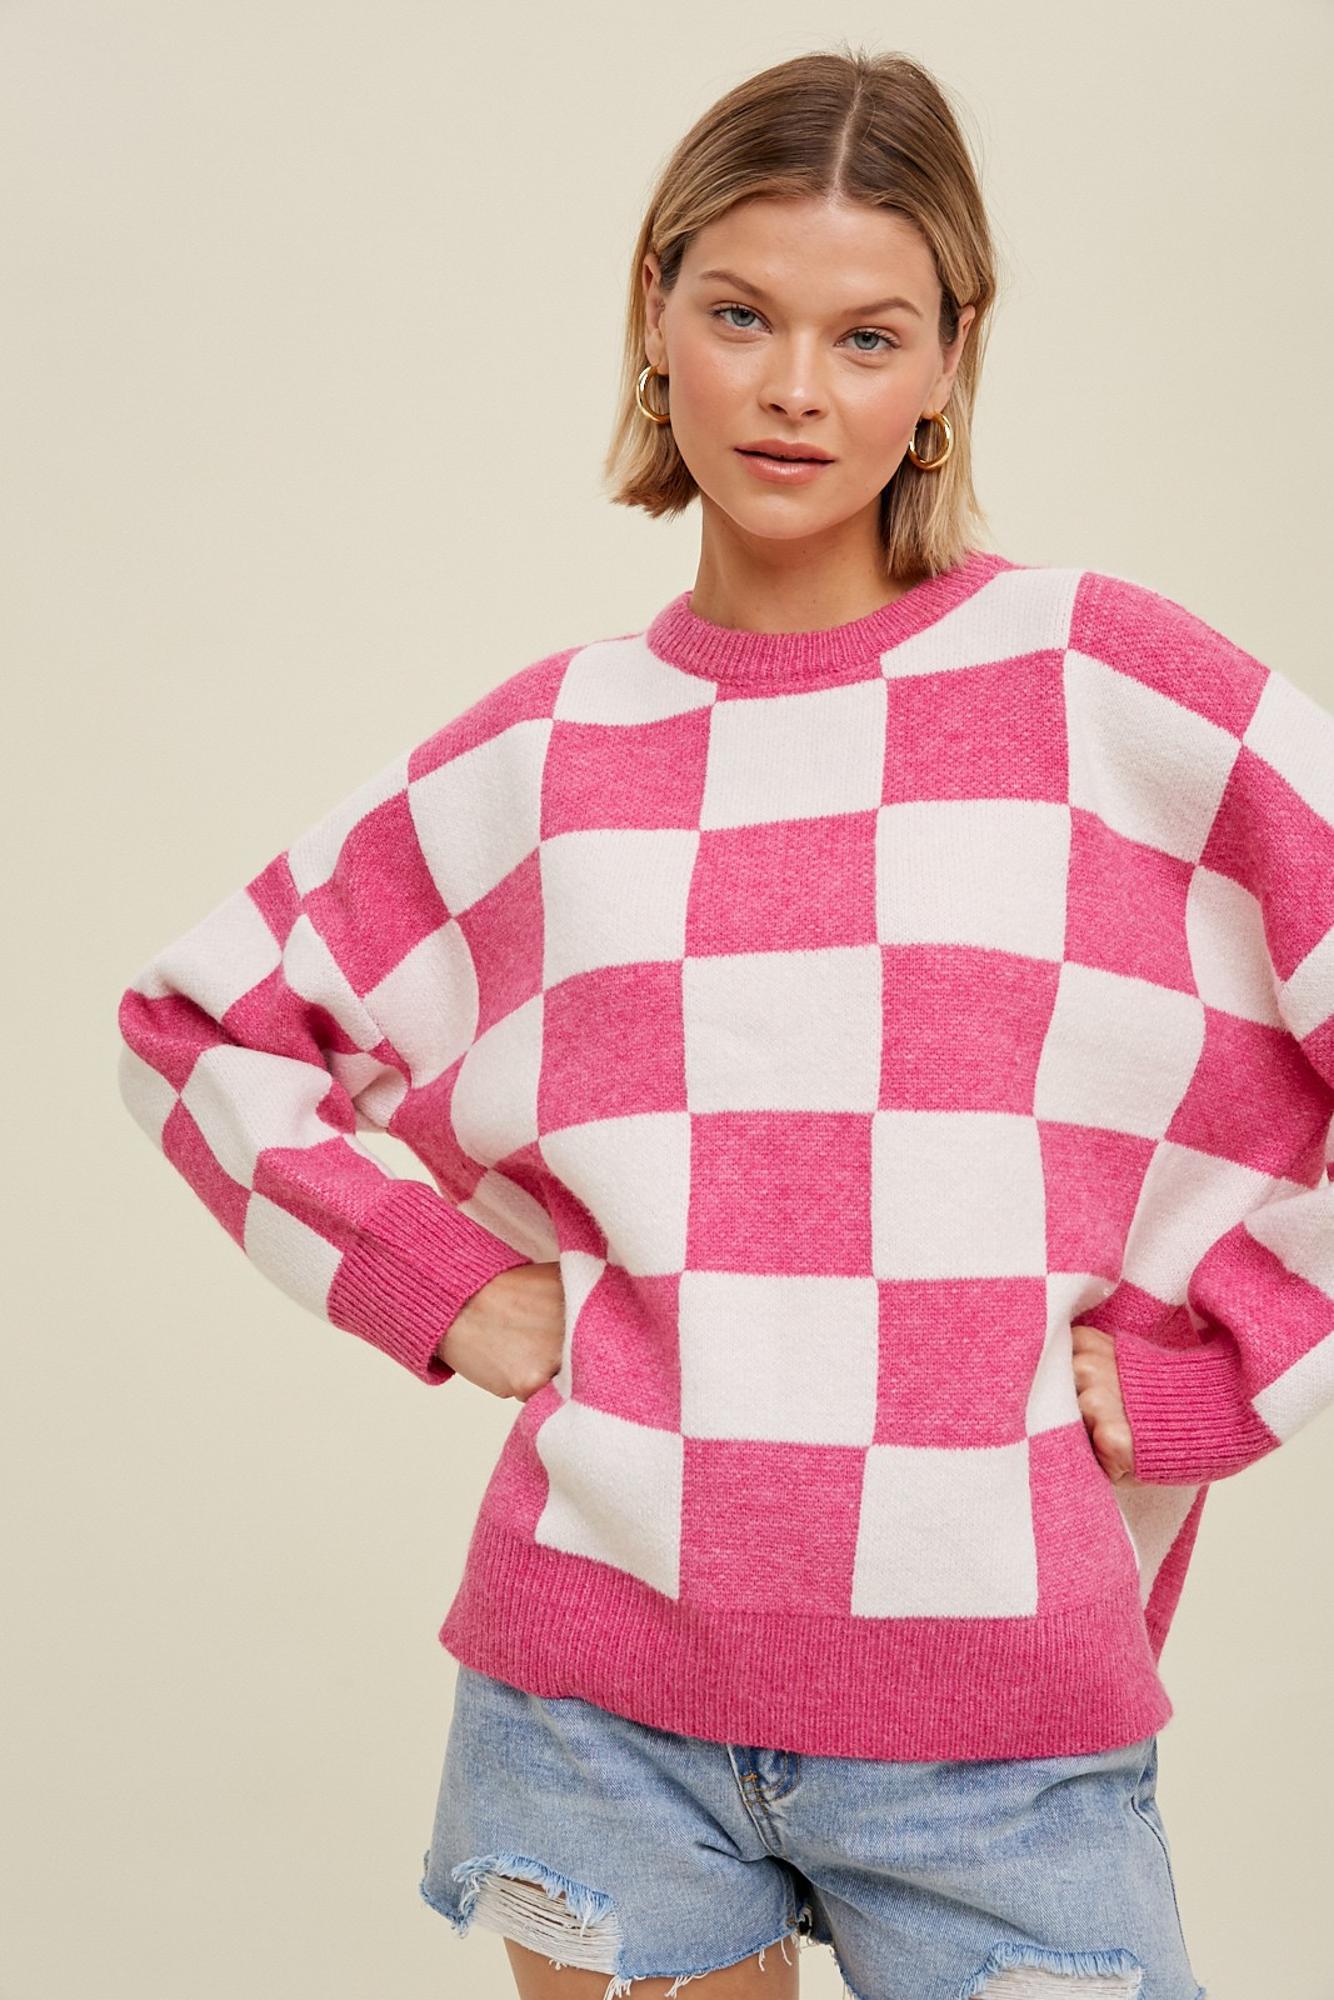 Obsessed With Me Checkered Sweater